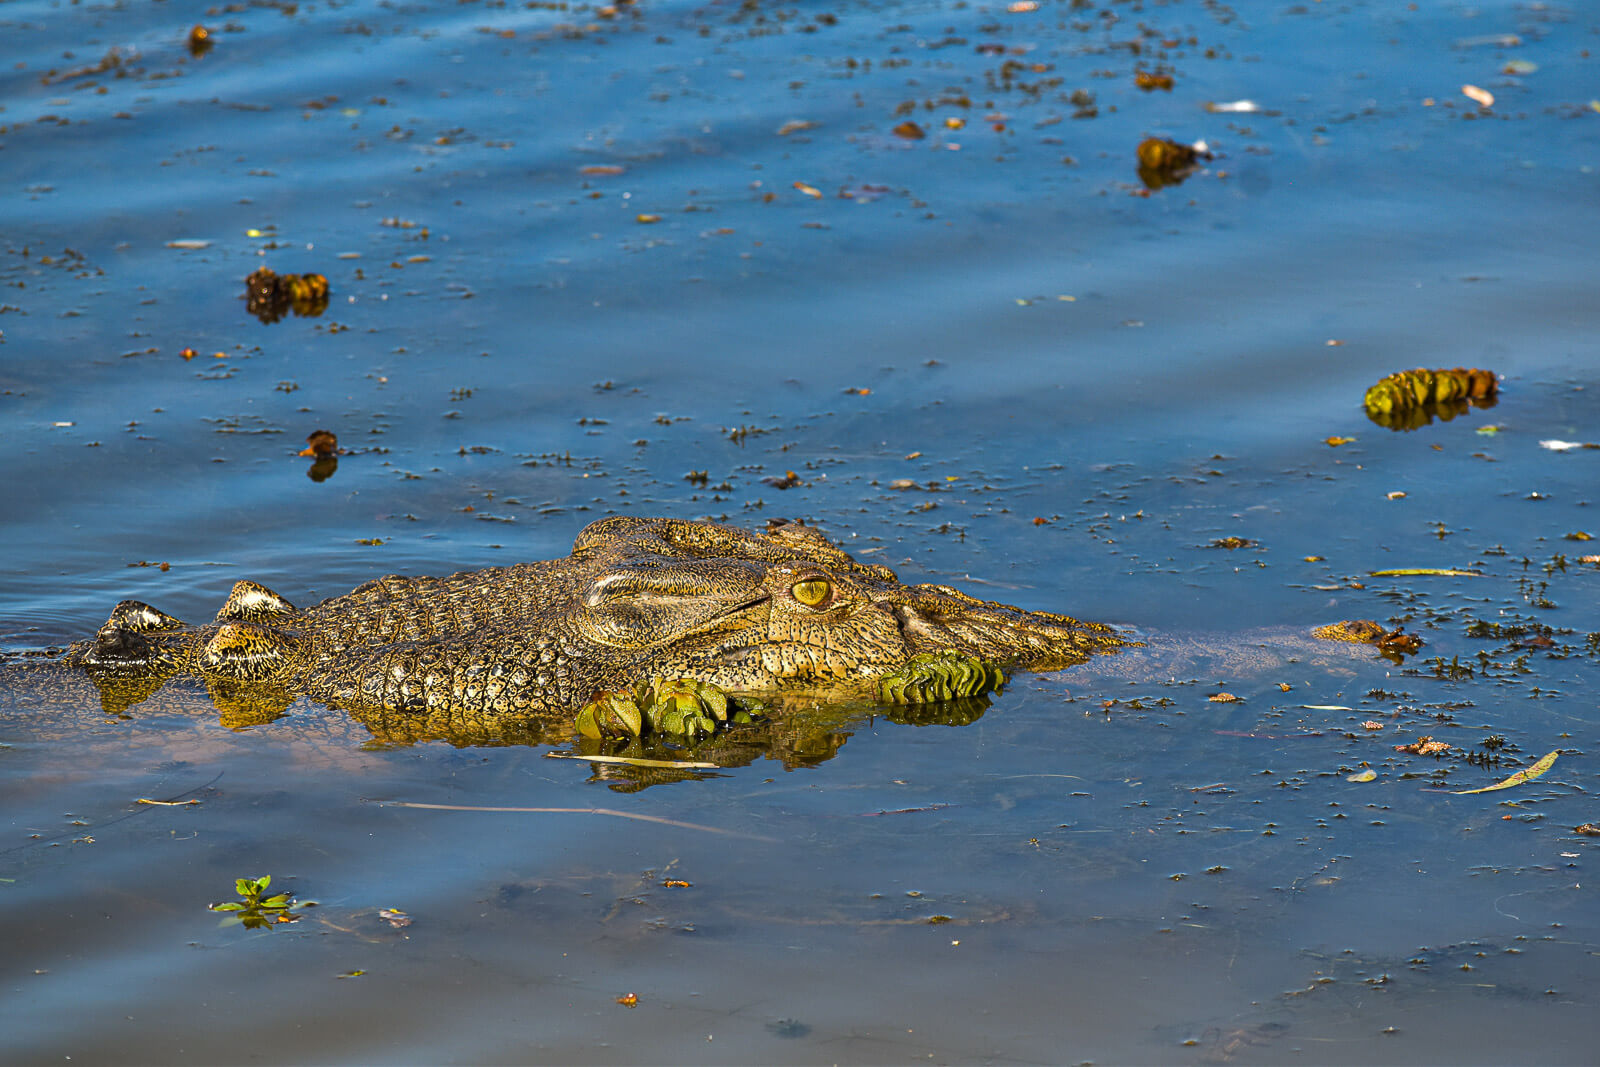 A crocodile peeps out of the water